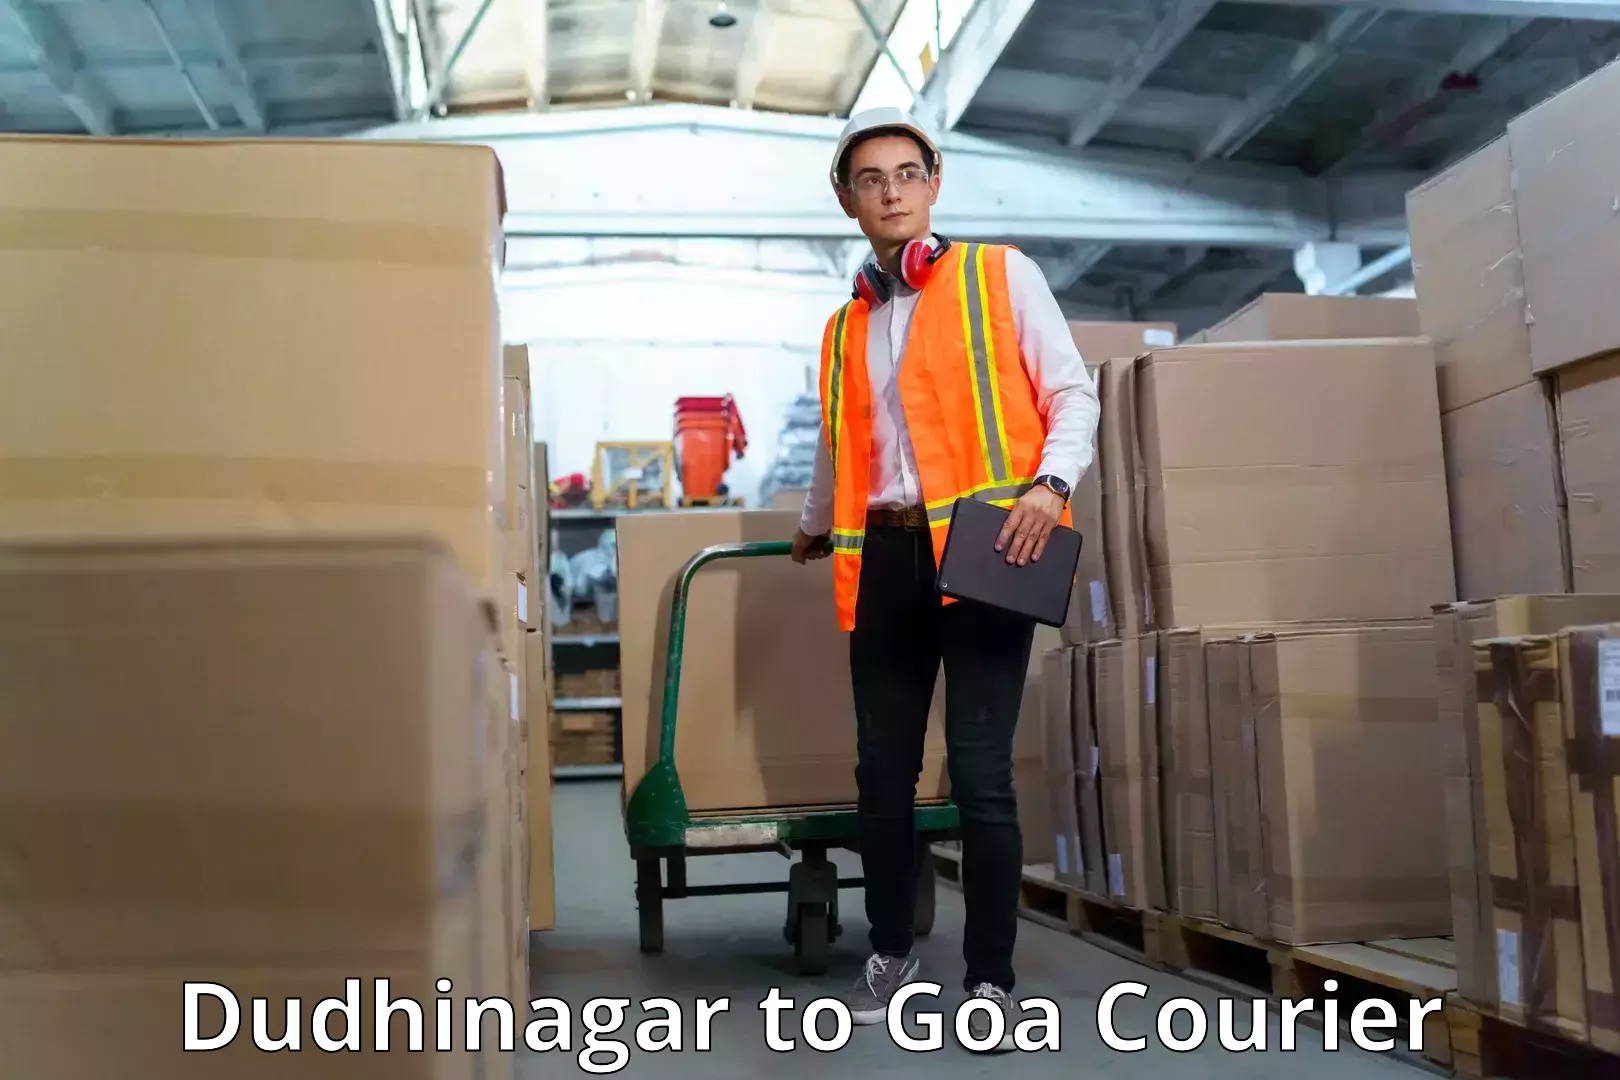 Easy access courier services Dudhinagar to Panaji